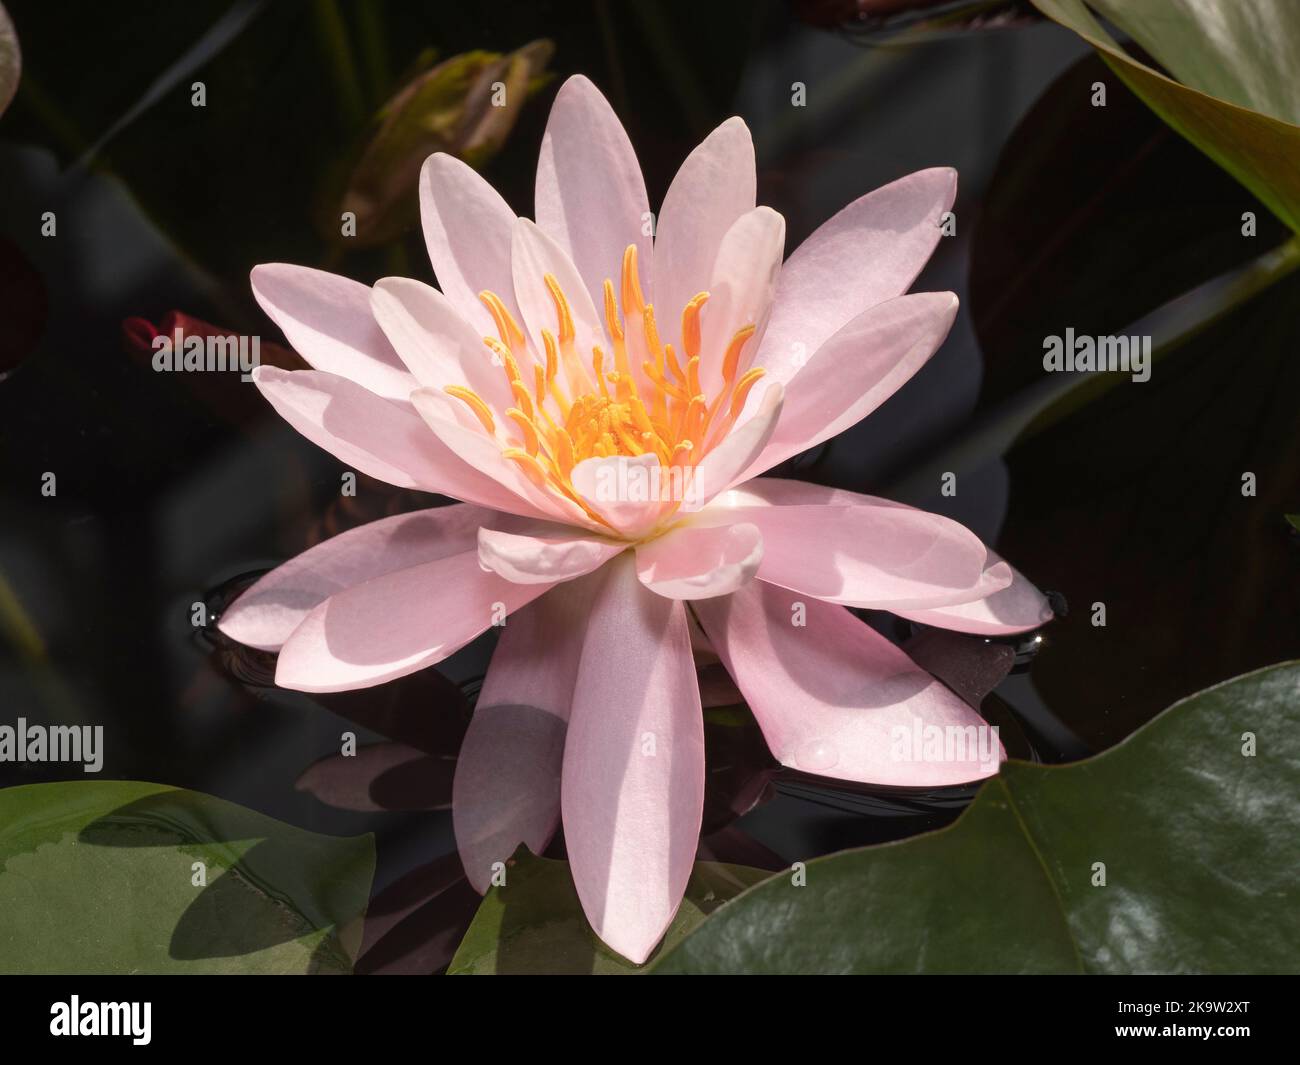 Pink water lily with yellow pistils in the middle, latin name Nymphaea Stock Photo